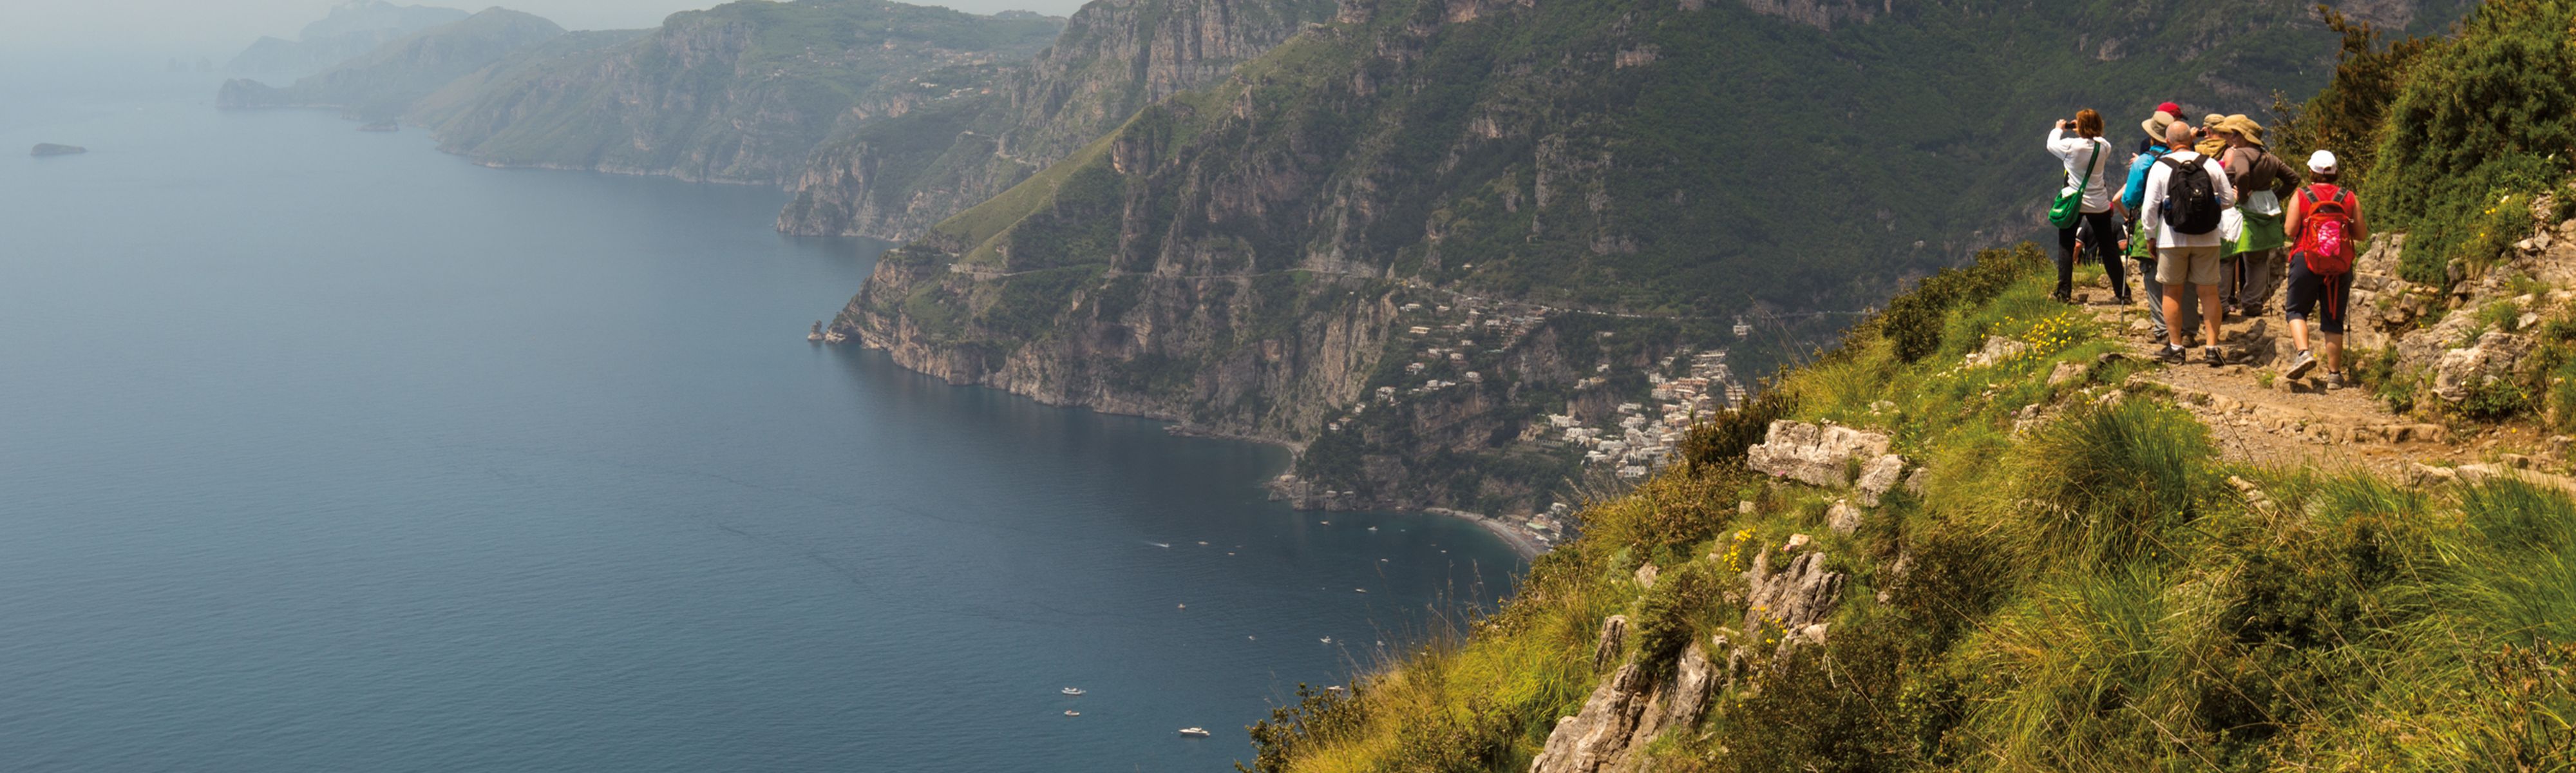 group of travelers walking along trail in the amalfi coast in italy